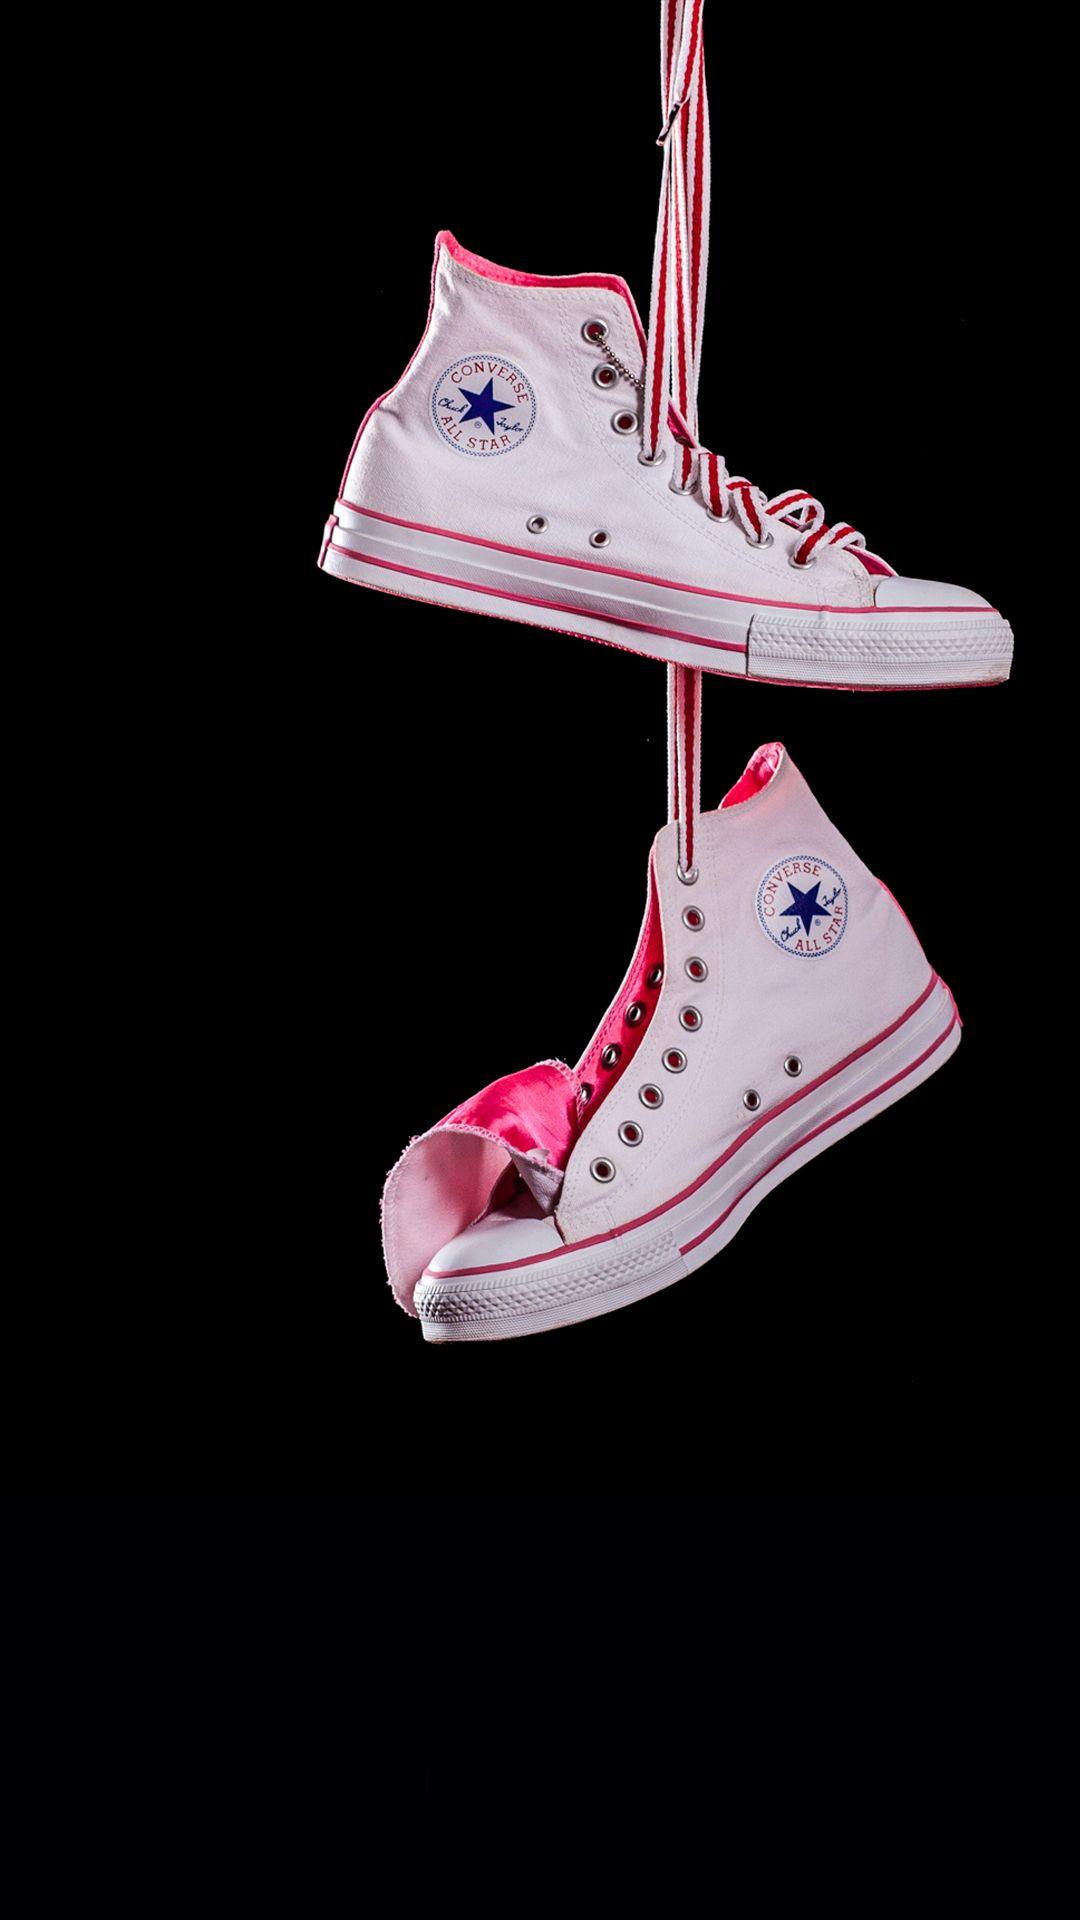 Converse Wallpapers For Iphone 